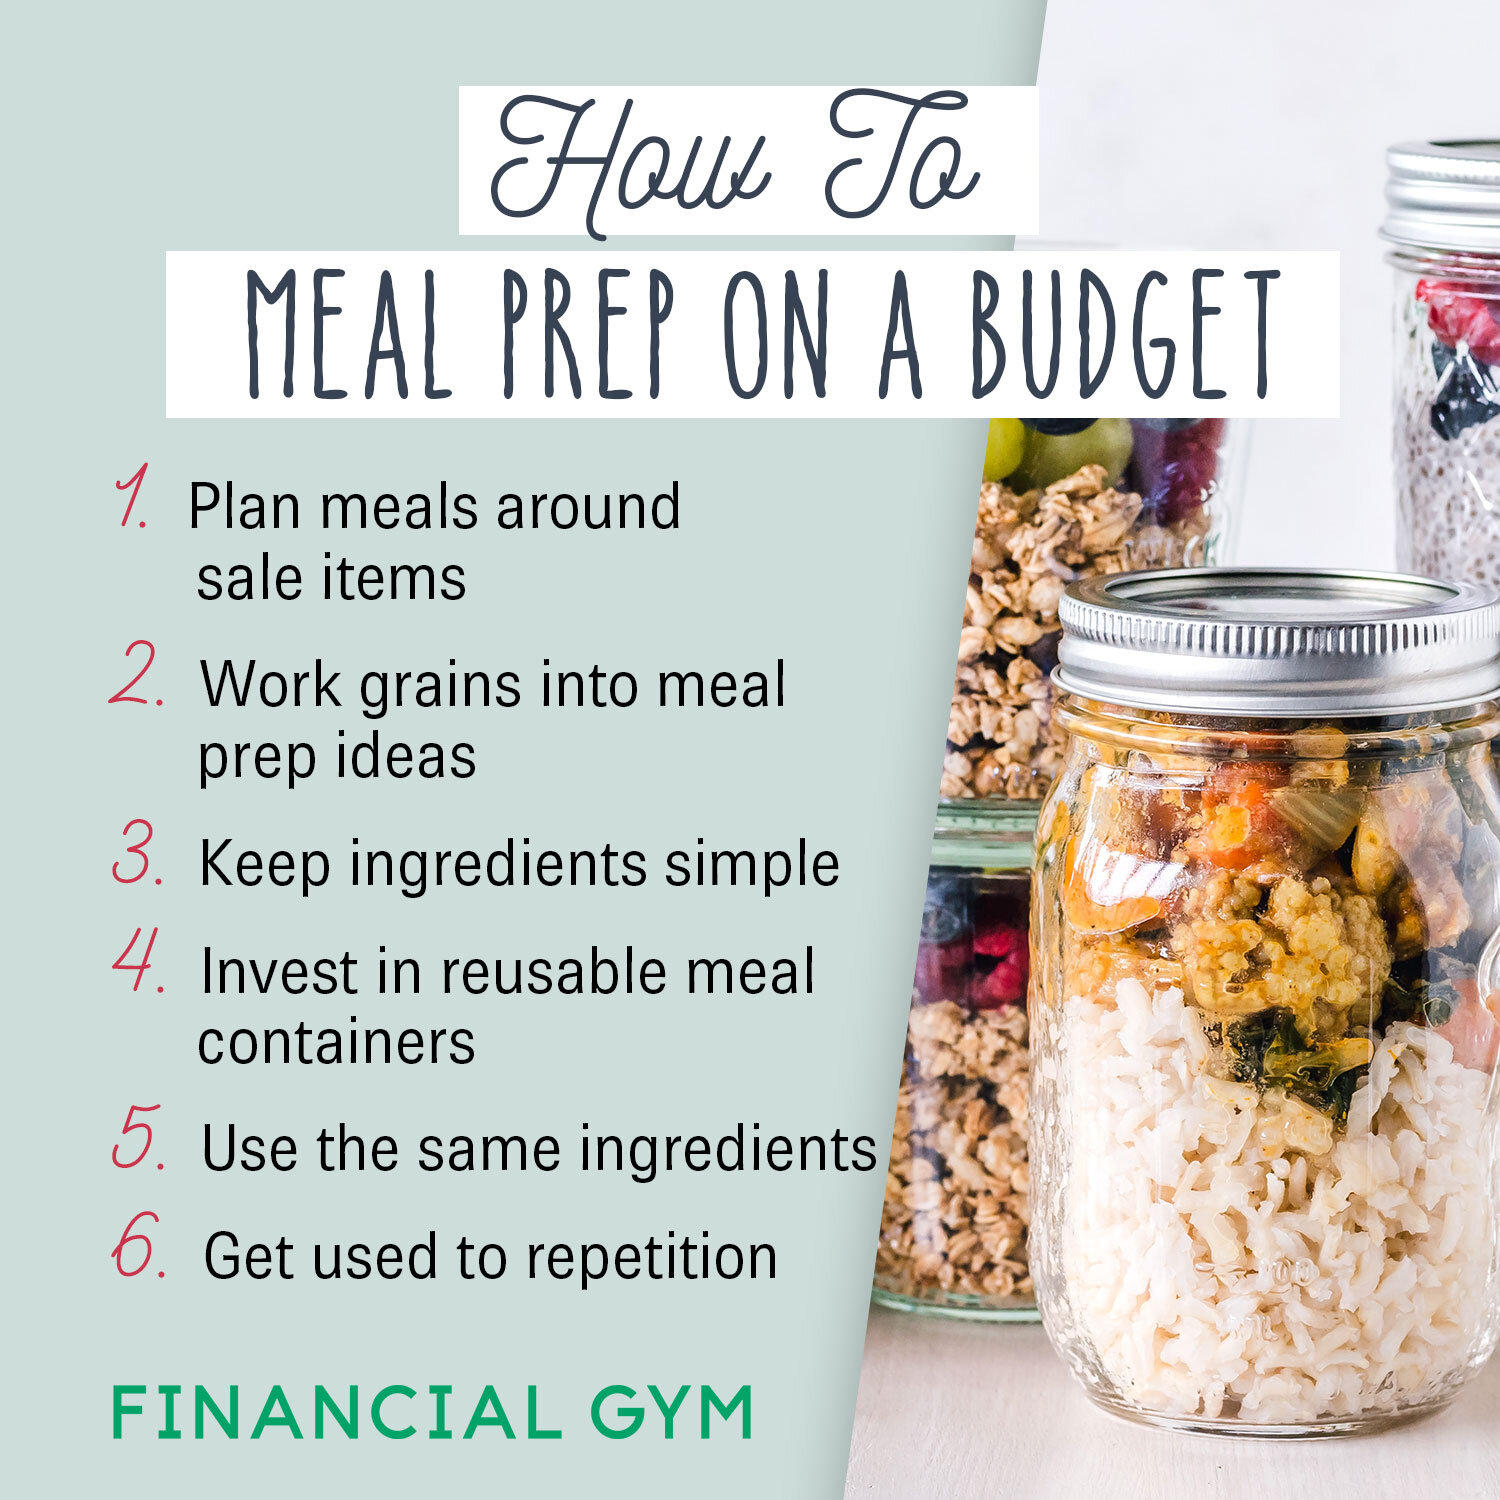 Meal prep on a budget